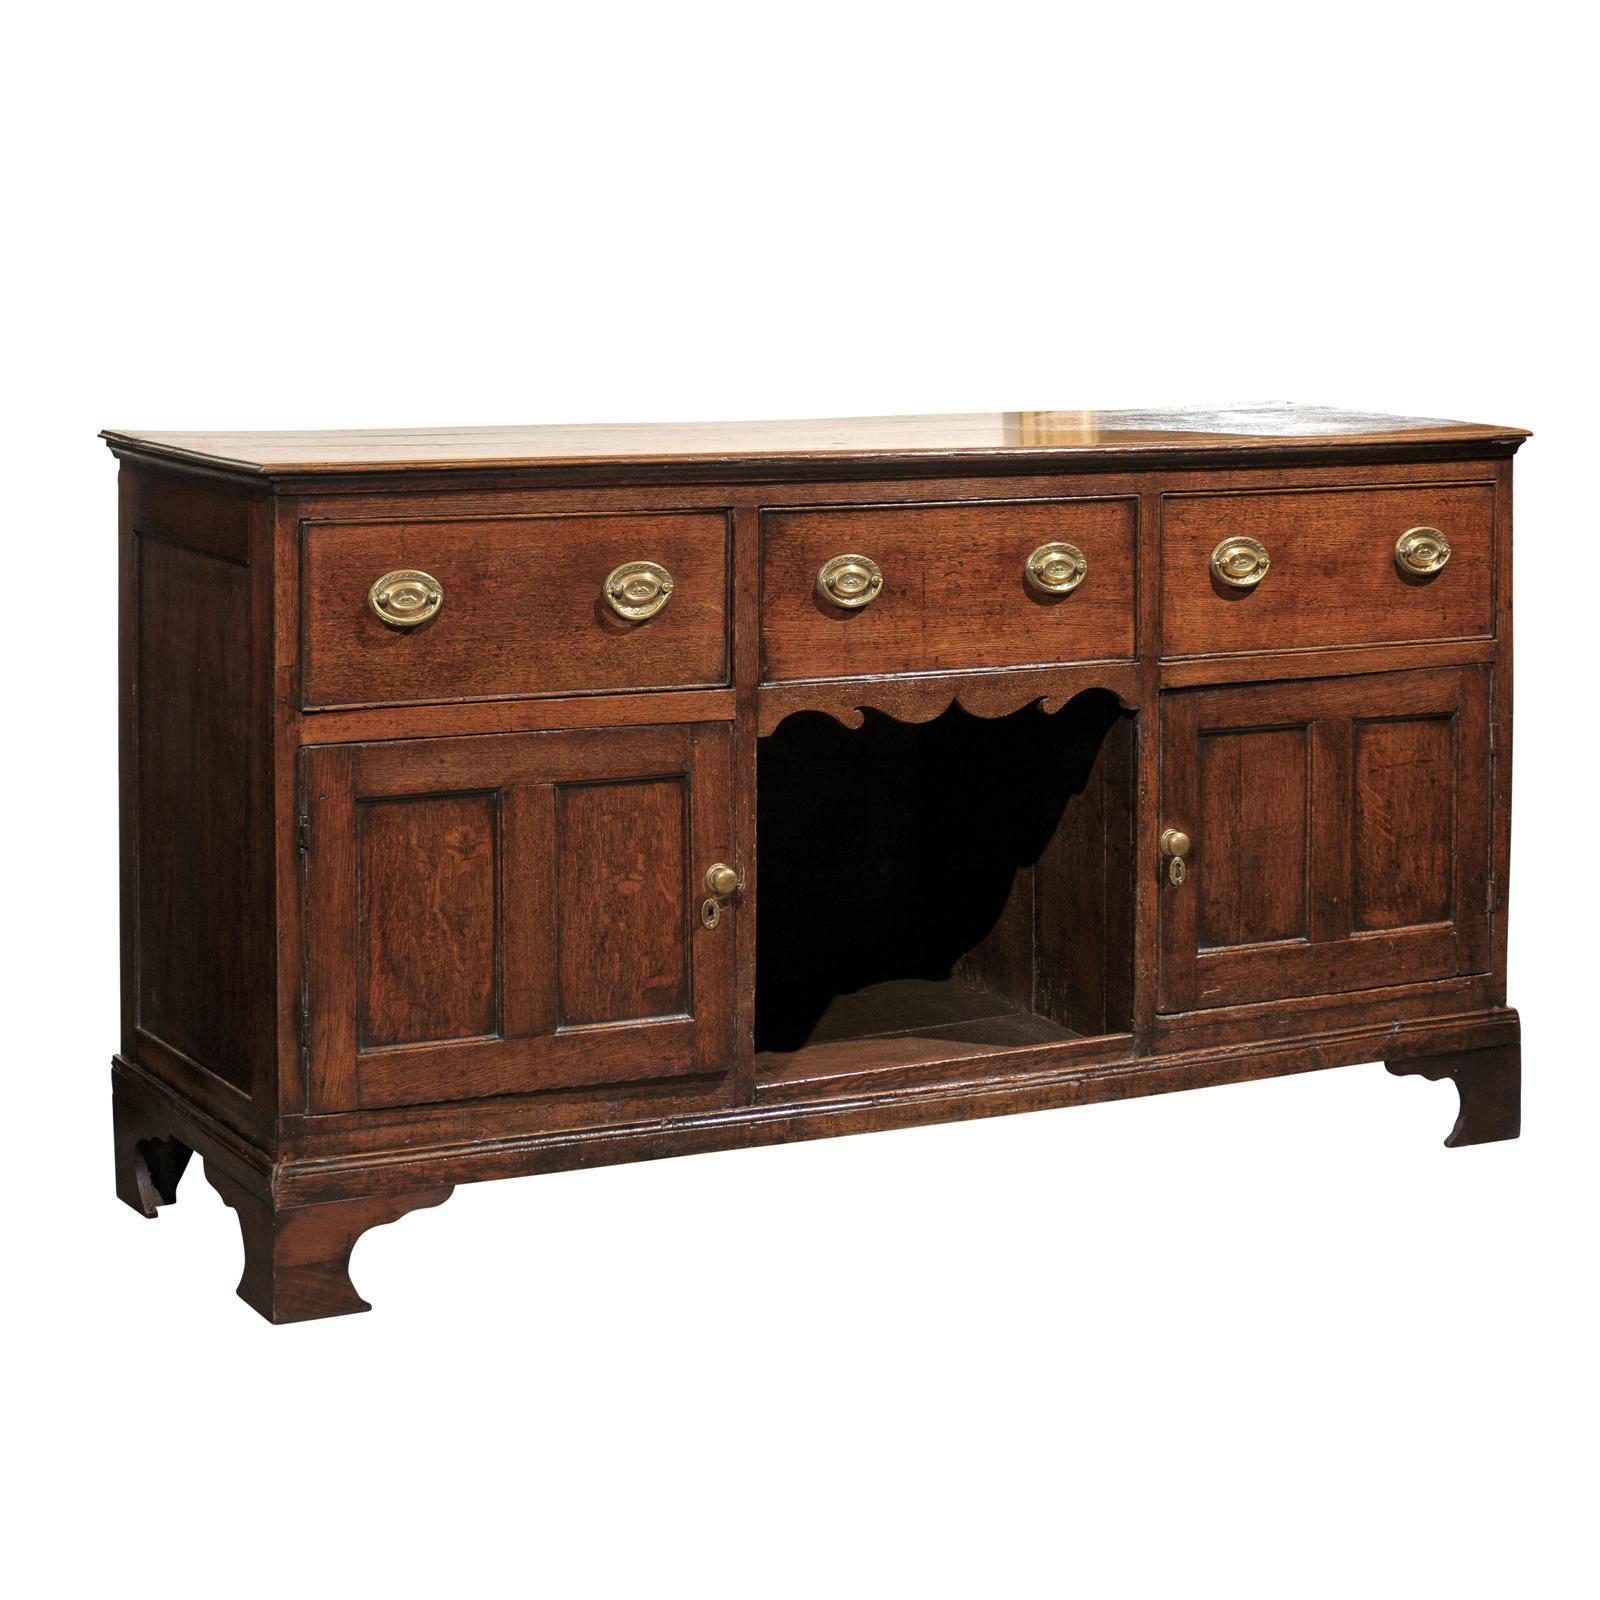 English Oak Dresser Base with Three Drawers over Two Doors and Shelf, circa 1800